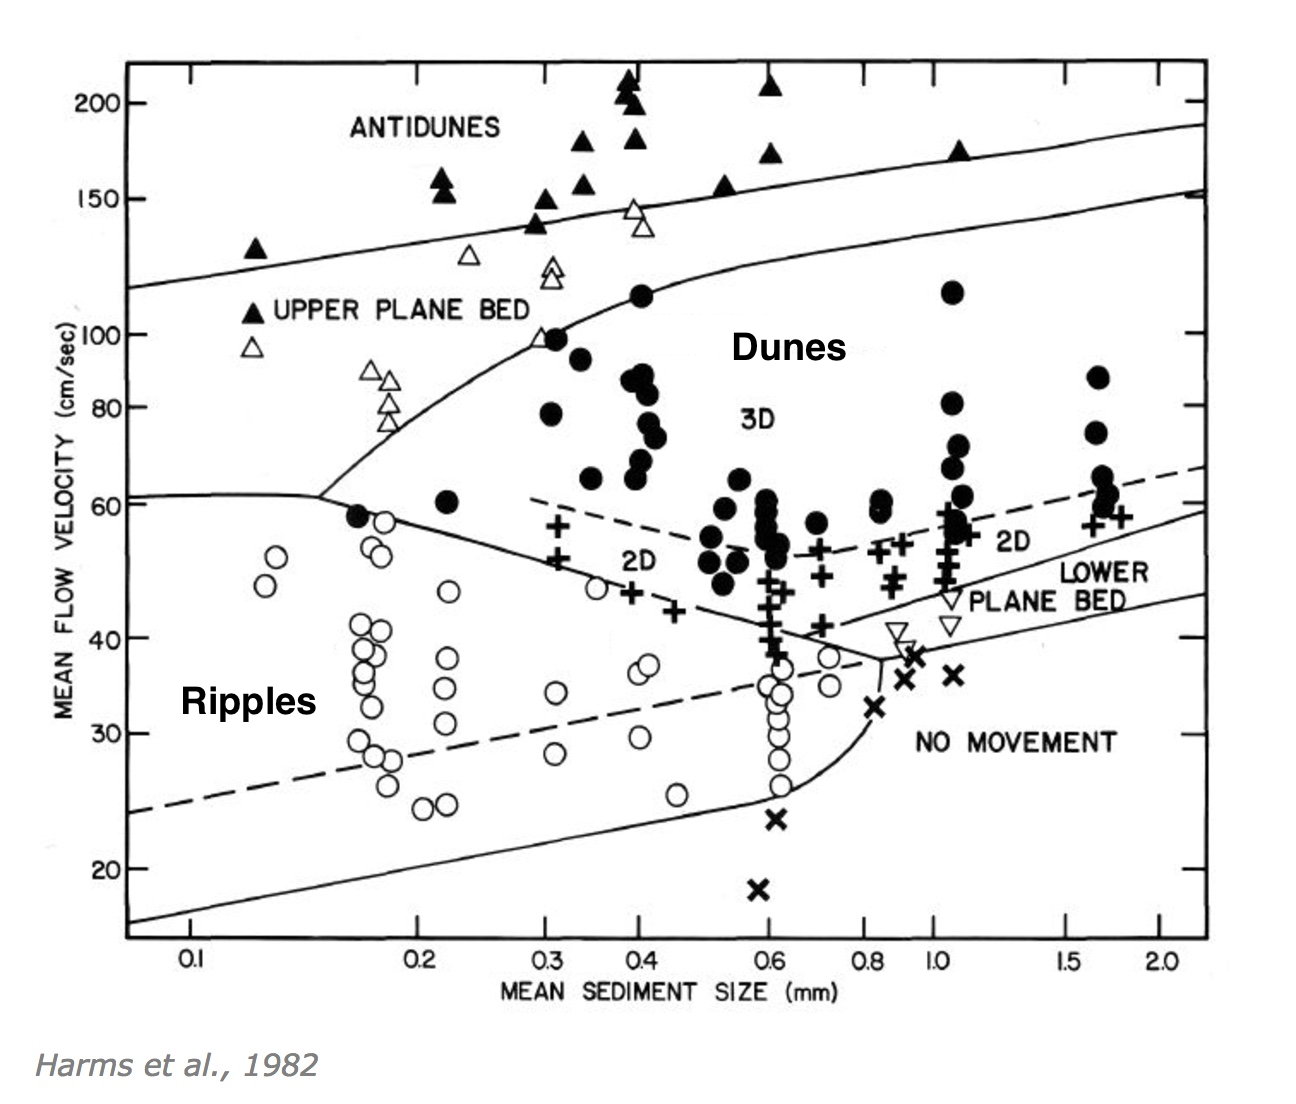 Bedform Flow Grain Size Diagram from Harms et al. (1982). The diagram shows where experiments were performed to produce different bedforms, including ripples, lower plane bed, dunes, upper plane bed, and antidunes.